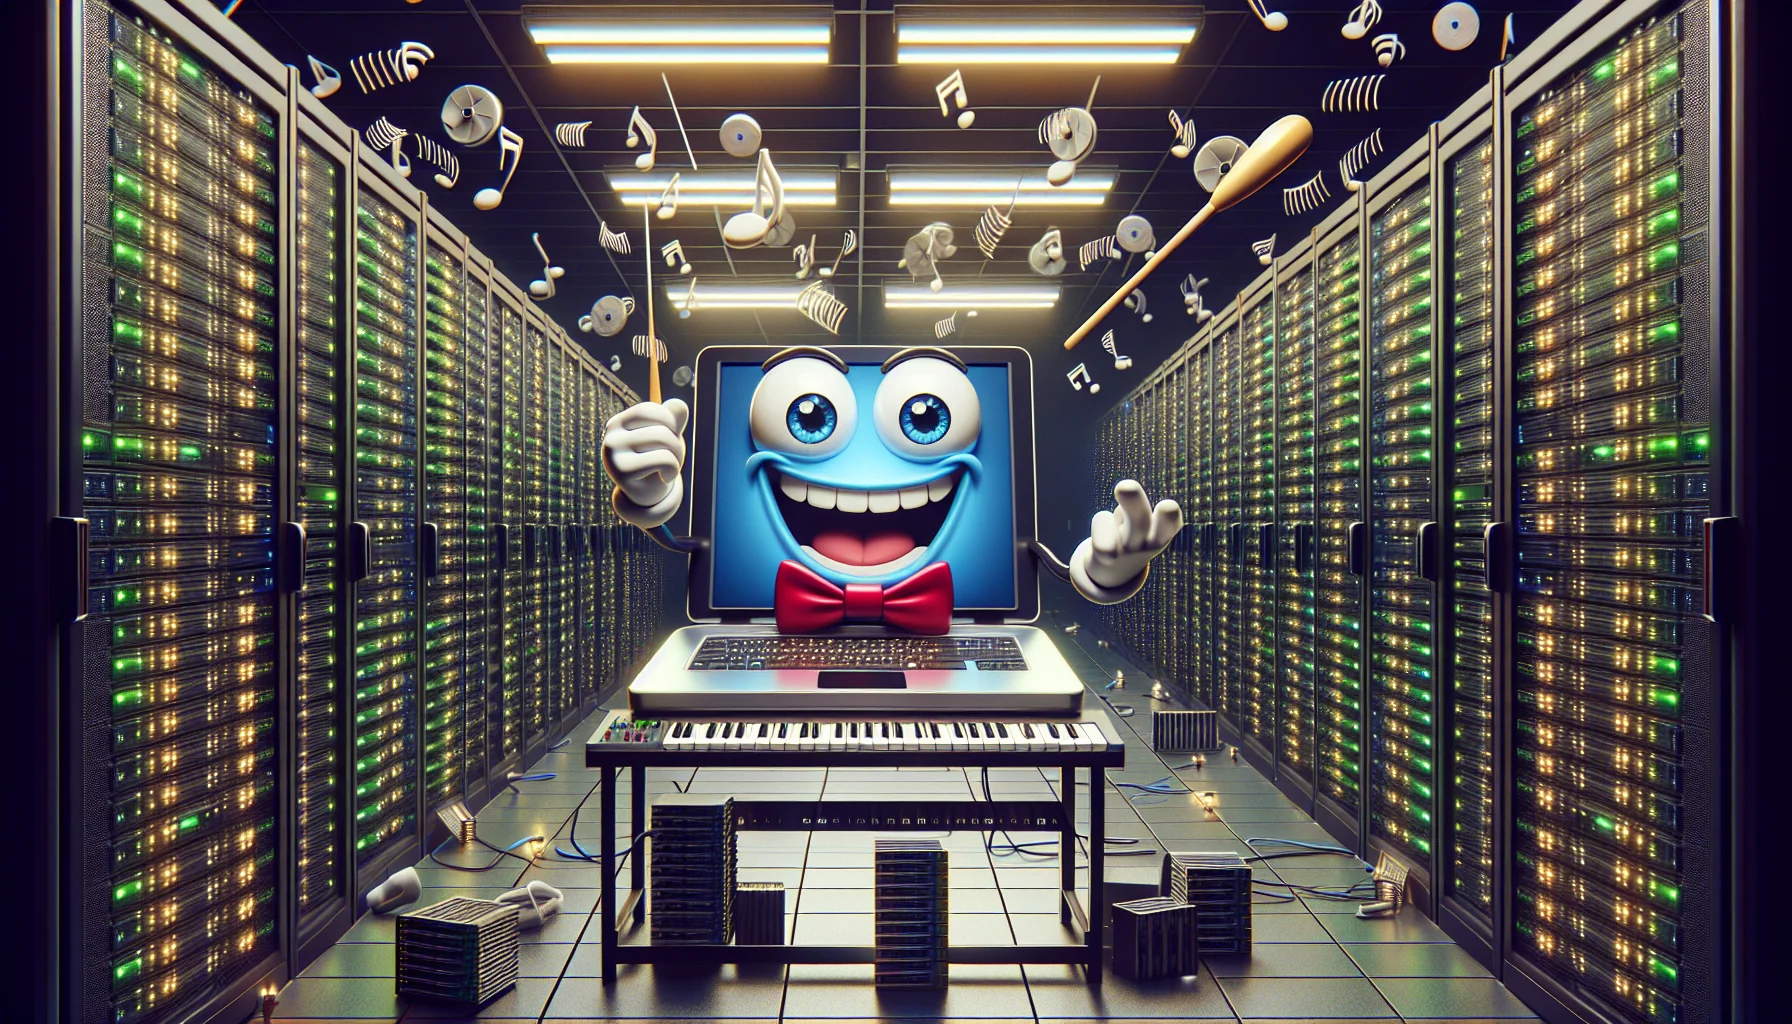 Generate a comical image showcasing a generic web hosting platform. The scene is staged inside a large, bustling server room filled with racks upon racks of blinking machines. In the middle of the clutter, an anthropomorphic cartoon laptop, with a big grin plastered across its screen, energetically orchestrates the activities. It's waving a conductor's baton, directing the symphony of glowing indicator lights and whirring fans that hum in a harmonious orchestra - a playful take on the 'behind-the-scenes' of web hosting.